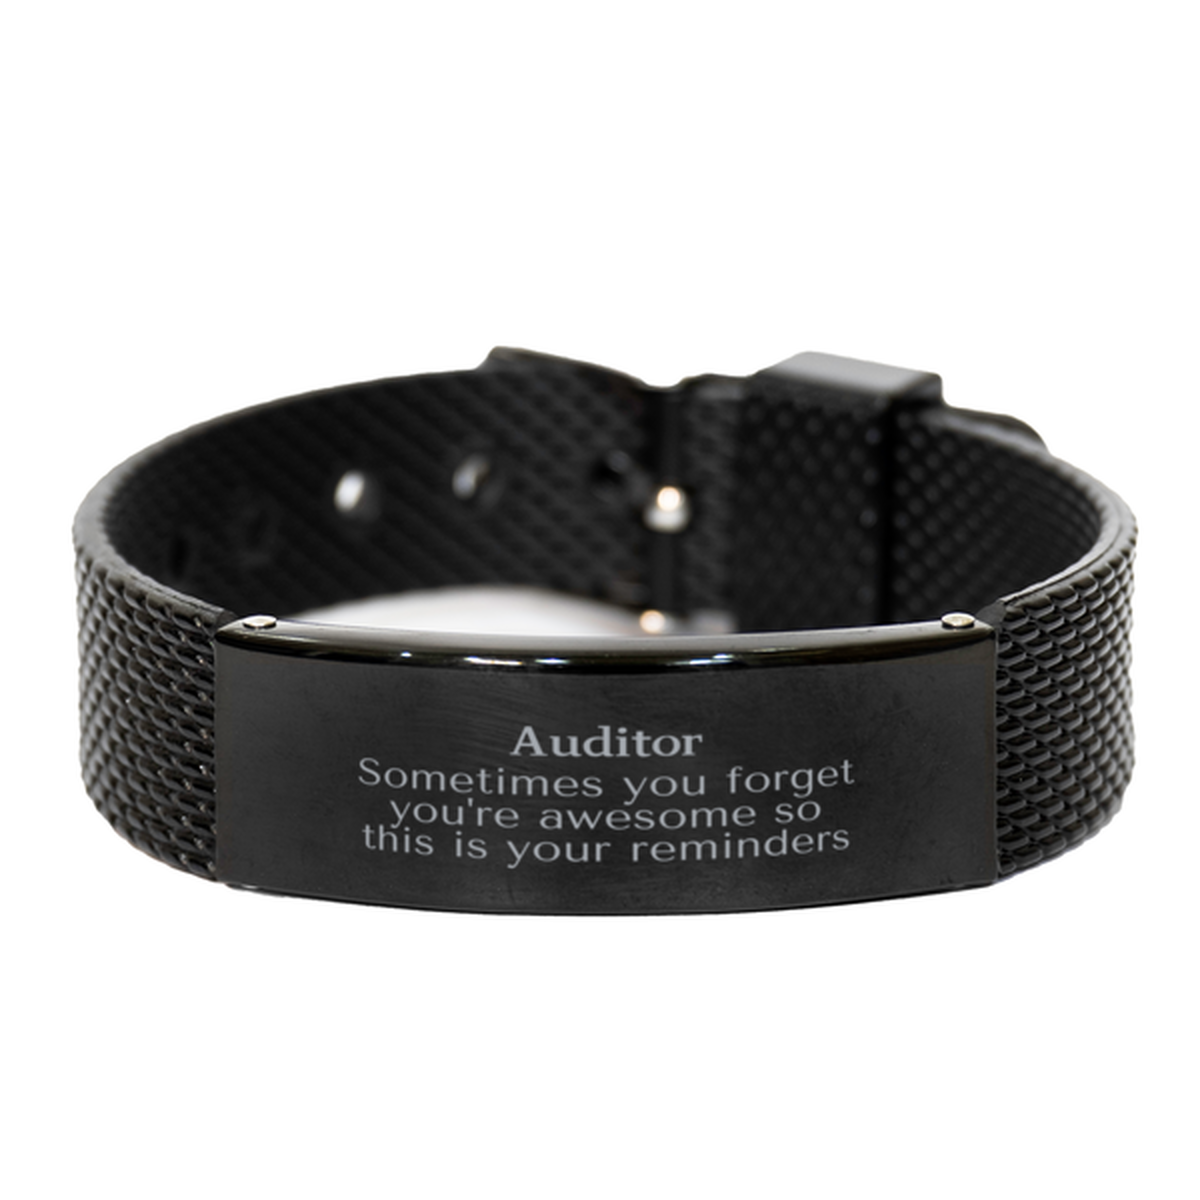 Sentimental Auditor Black Shark Mesh Bracelet, Auditor Sometimes you forget you're awesome so this is your reminders, Graduation Christmas Birthday Gifts for Auditor, Men, Women, Coworkers